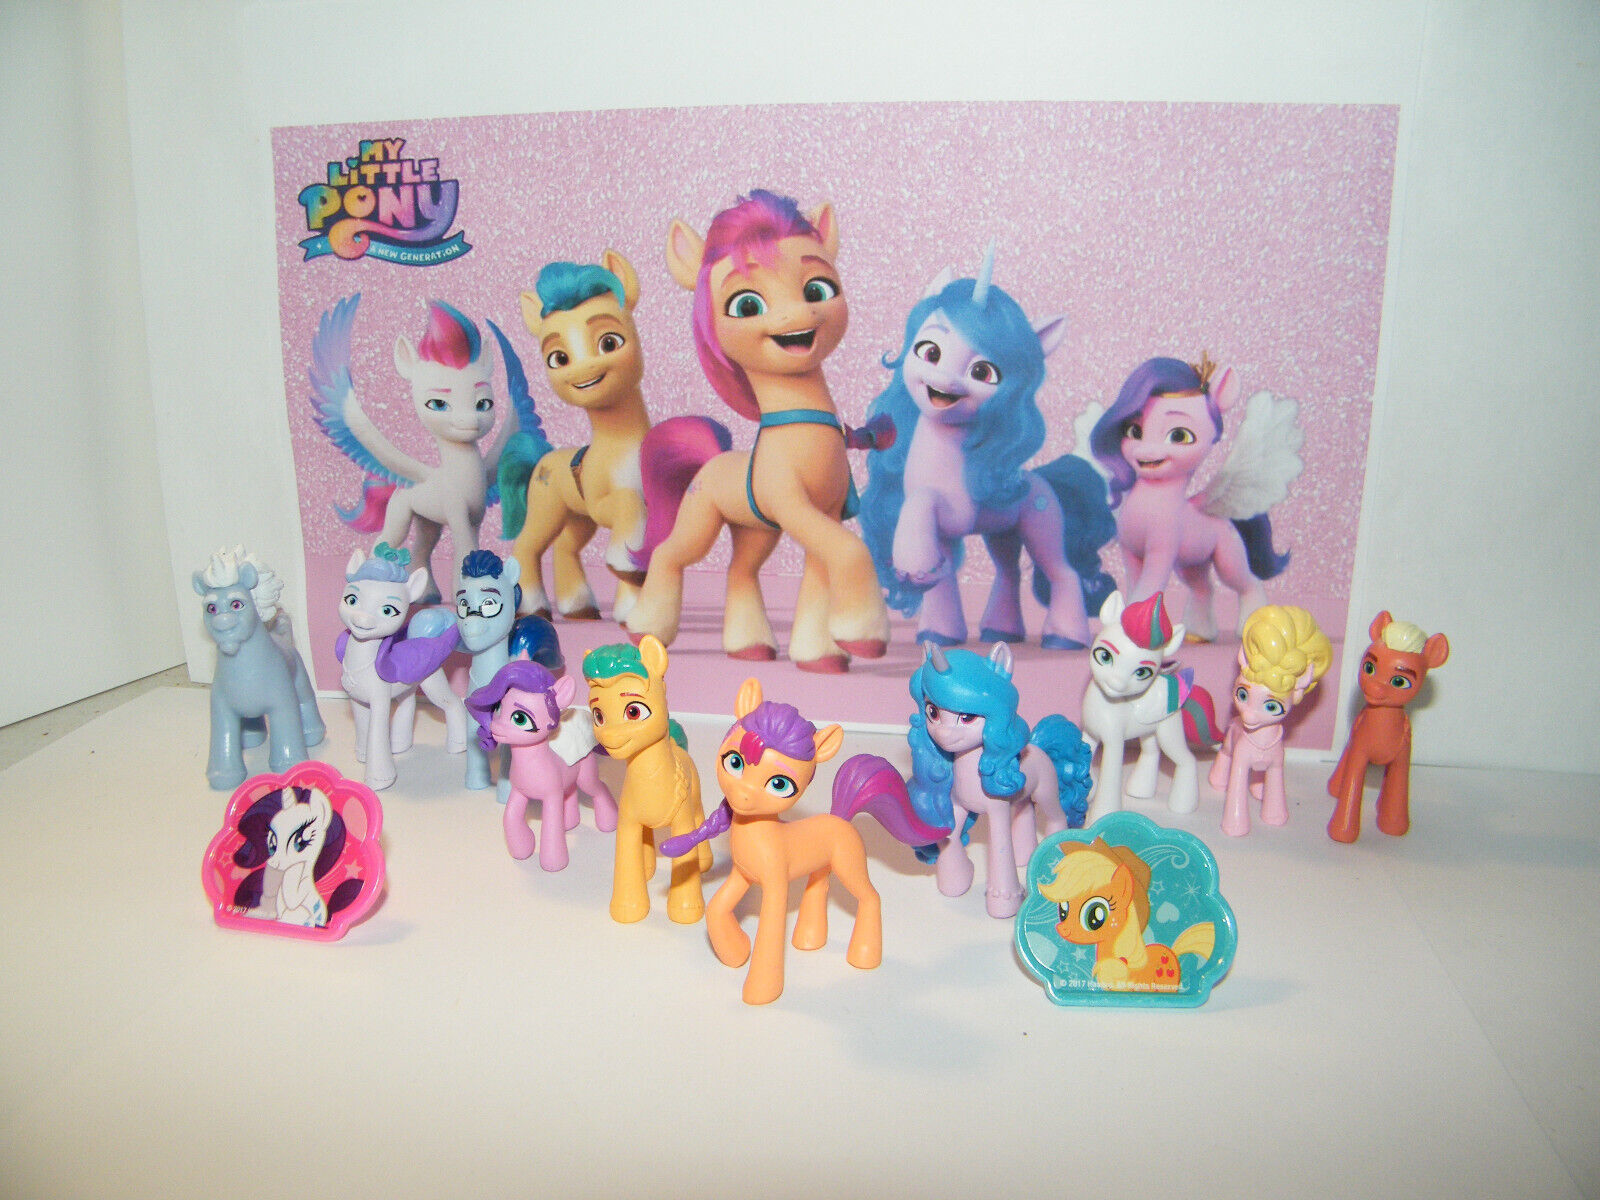 Primary image for My Little Pony: A New Generation Toy Figure Set of 10 and 2 Stickers!